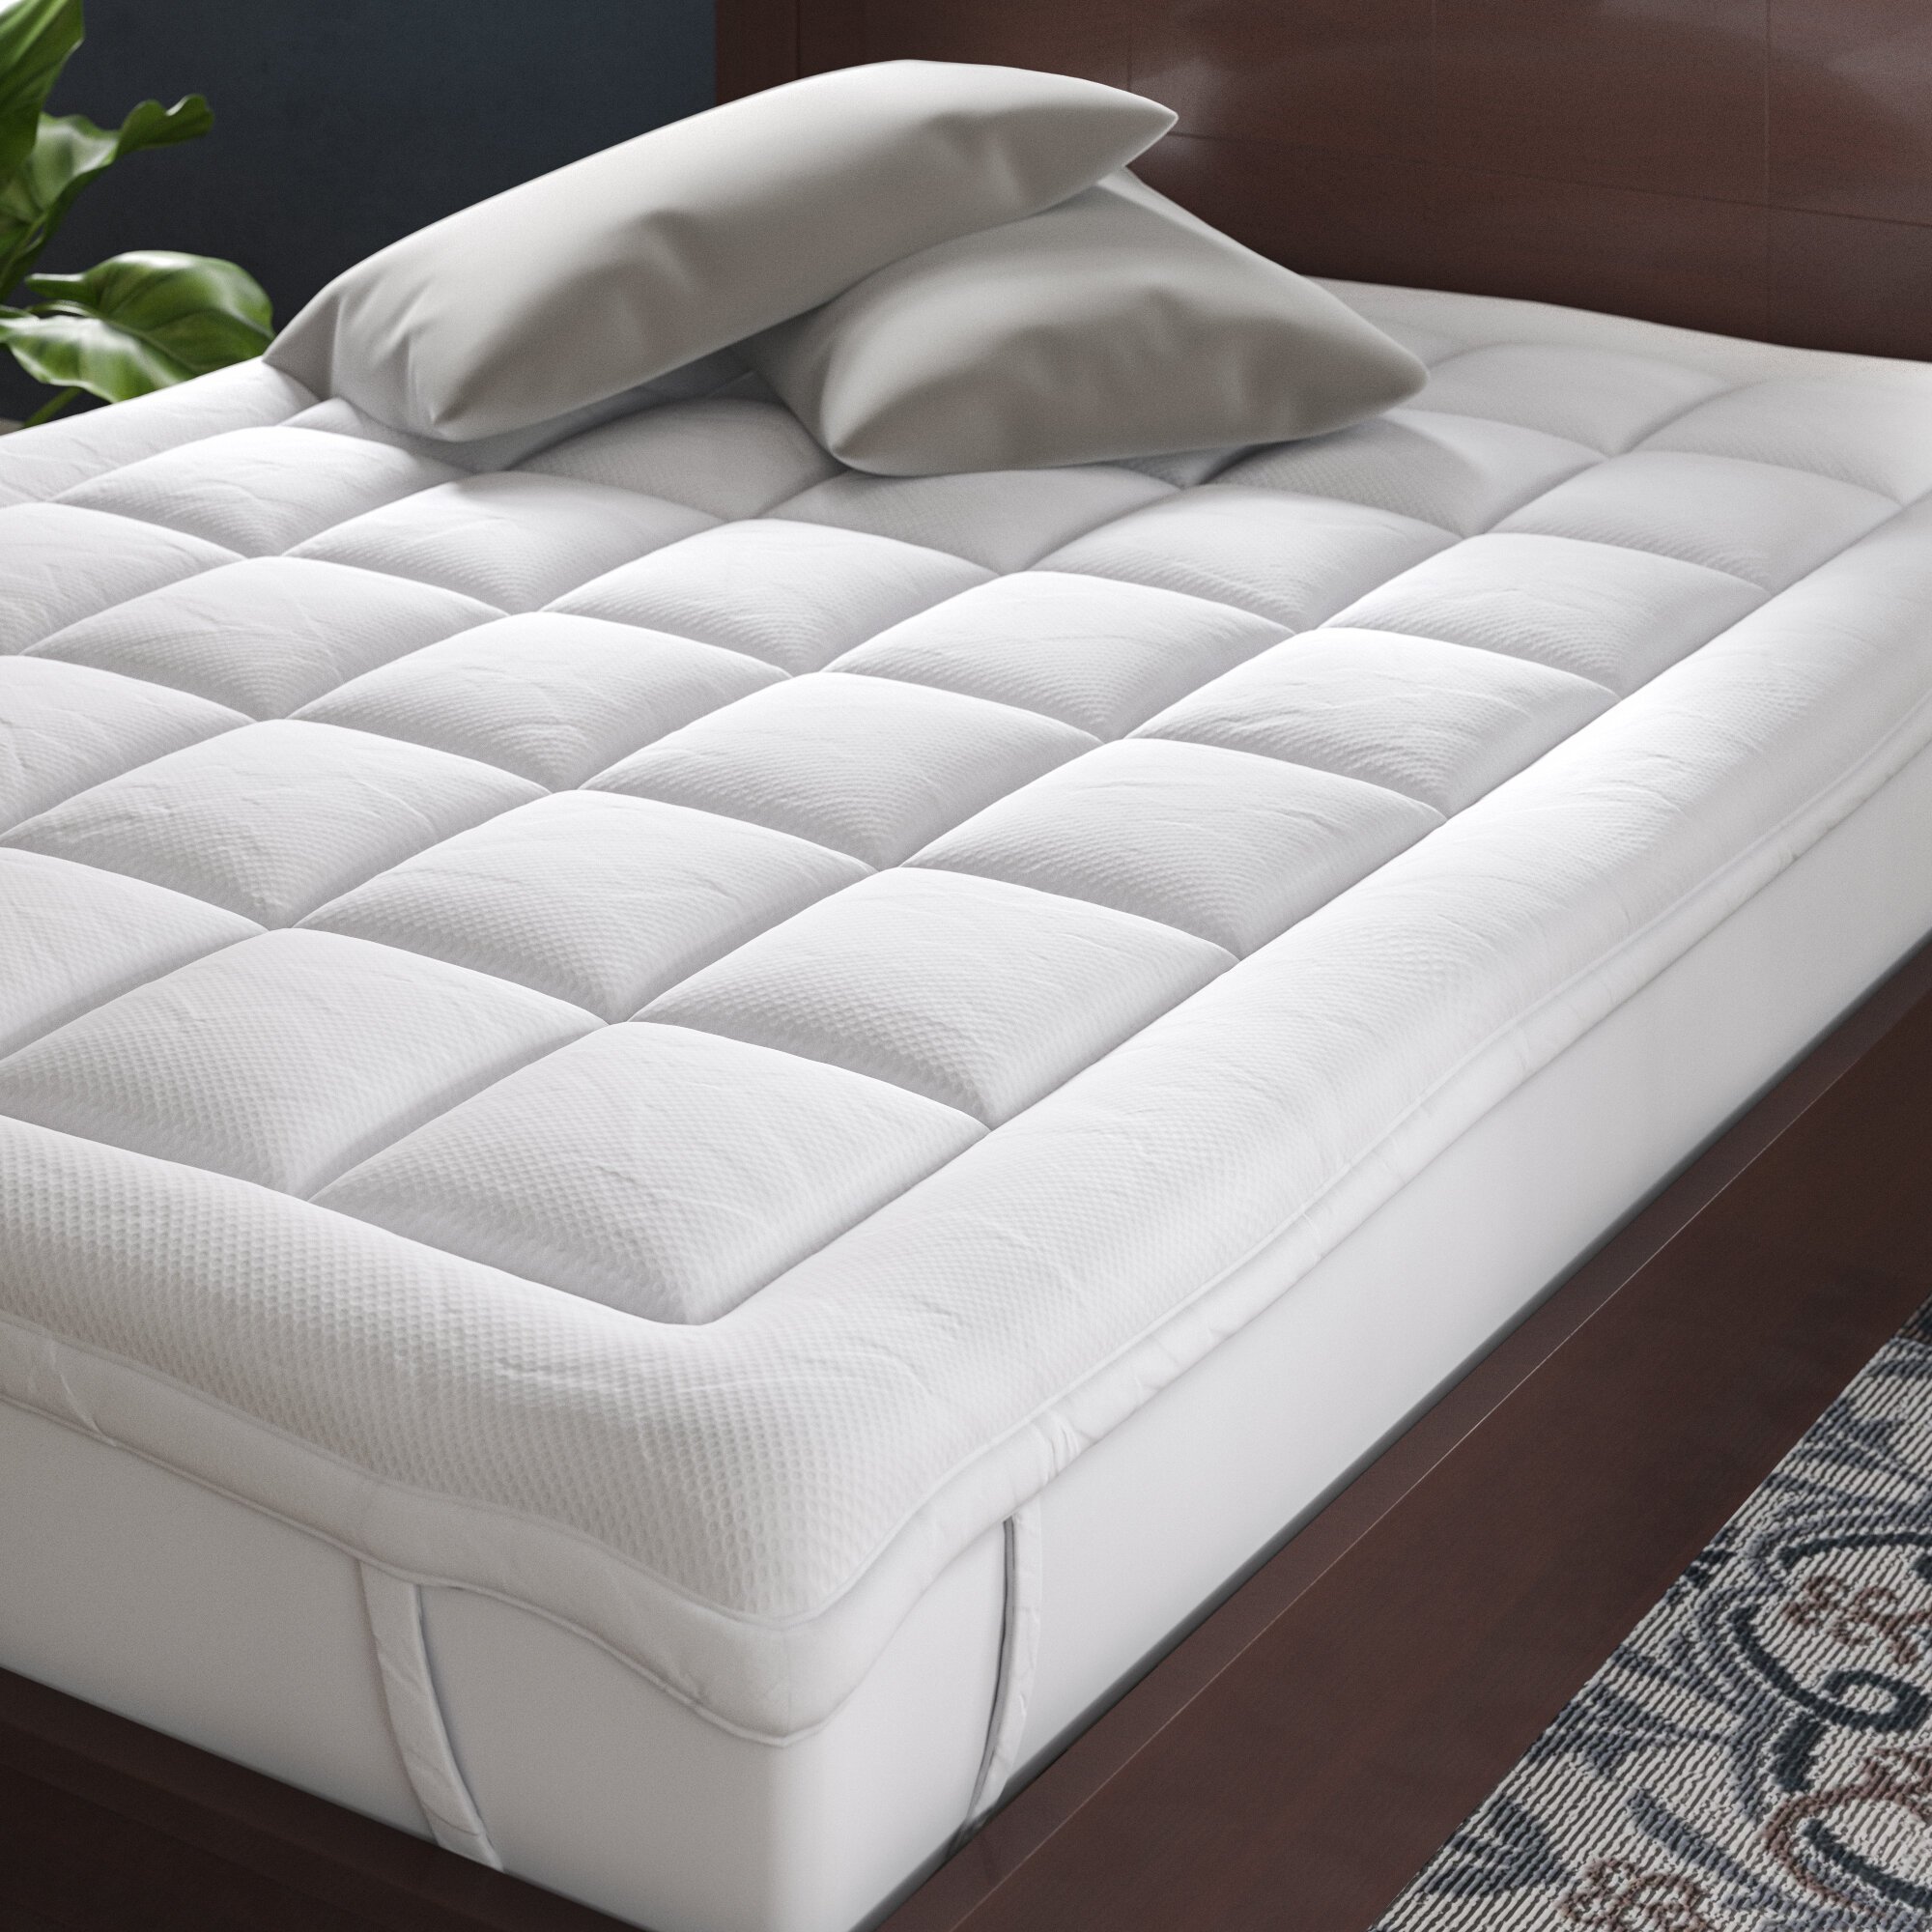 Mattress Topper Bed Pad Cover Hypoallergenic Pillow Top ...